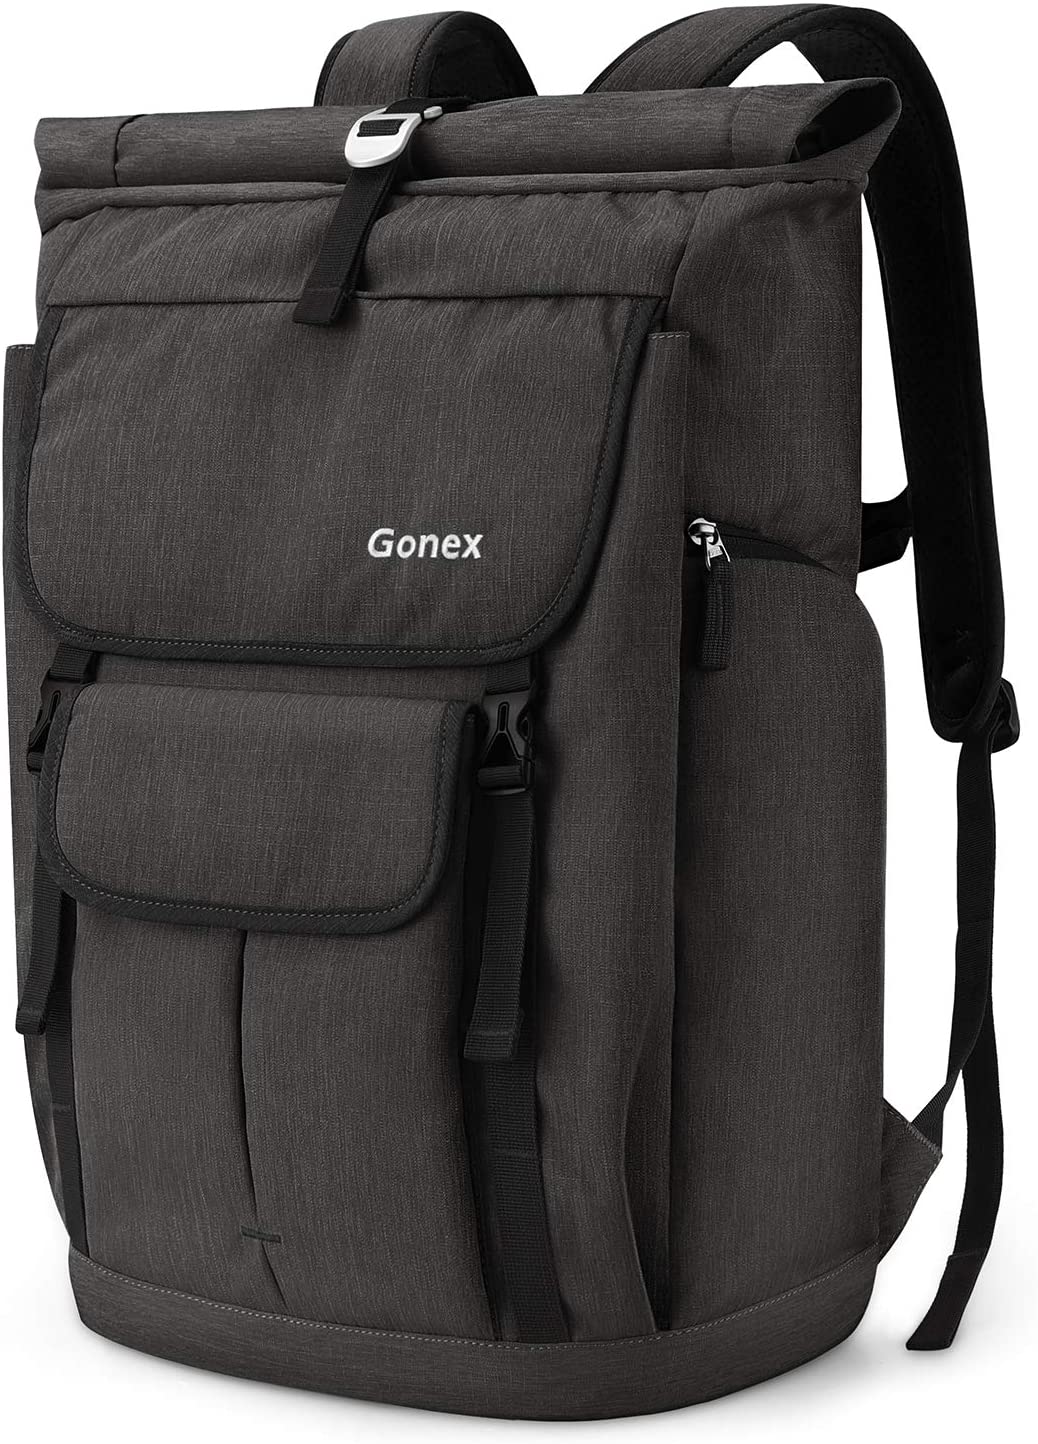 Gonex Durable Travel Laptop Casual Roll Top Backpack